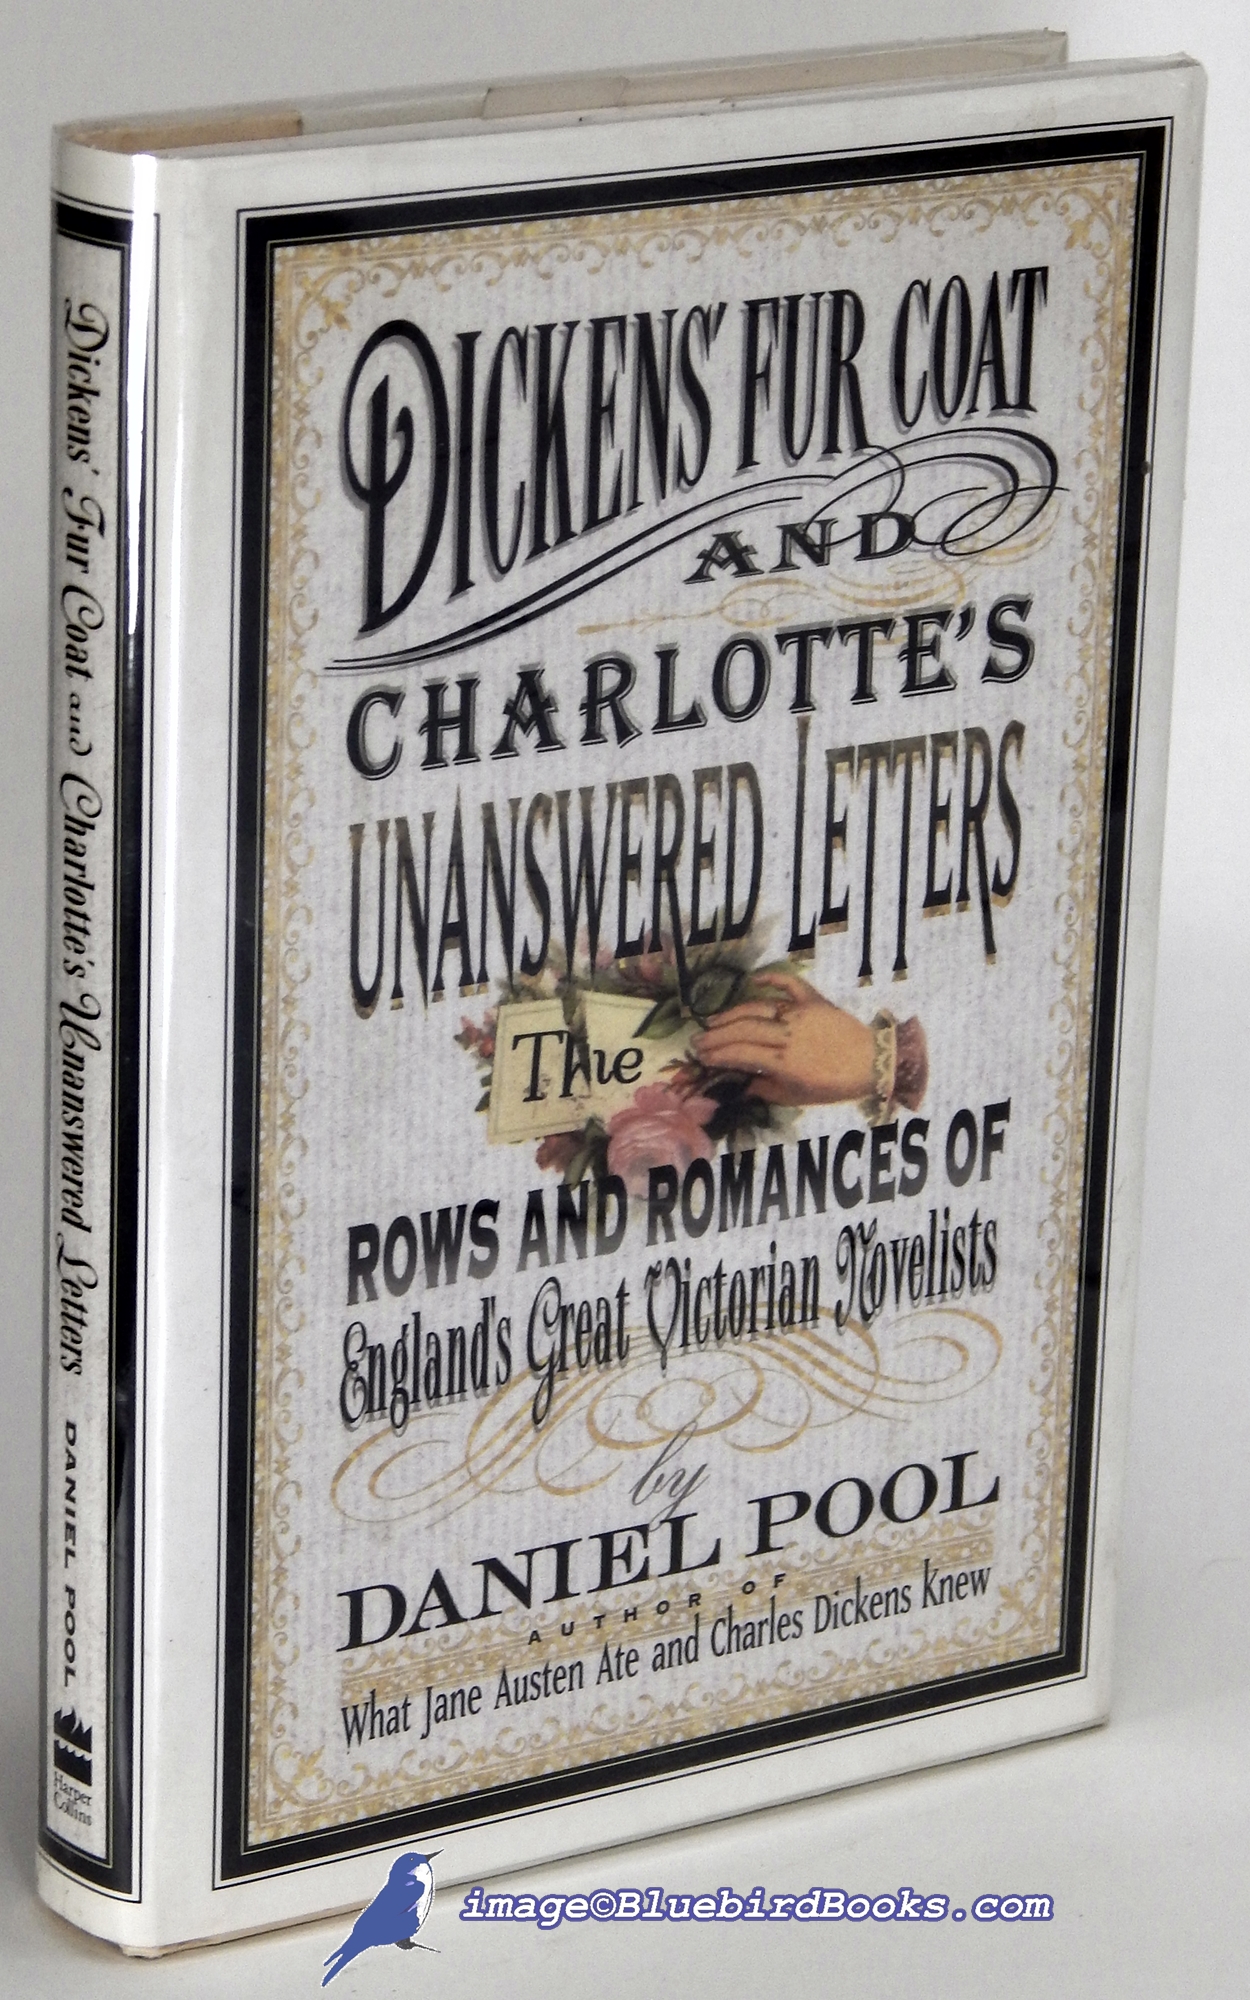 POOL, DANIEL - Dickens' Fur Coat and Charlotte's Unanswered Letters: The Rows and Romances of England's Great Victorian Novelists